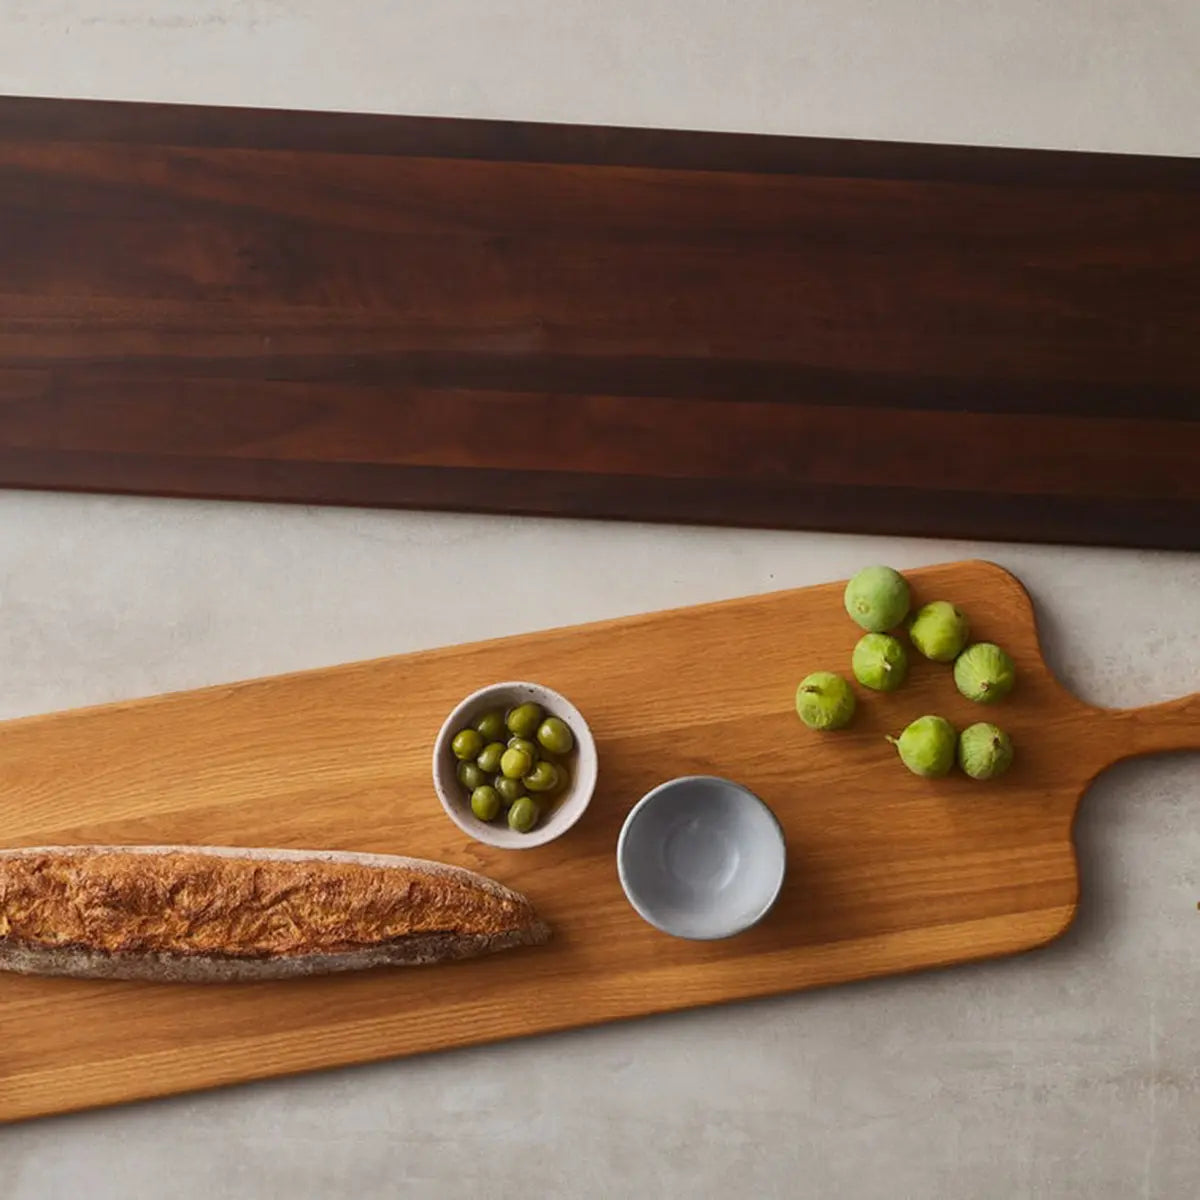 Blue Pheasant Edmund Natural Walnut Serving Board in a room with bread, white bowls with olives and food